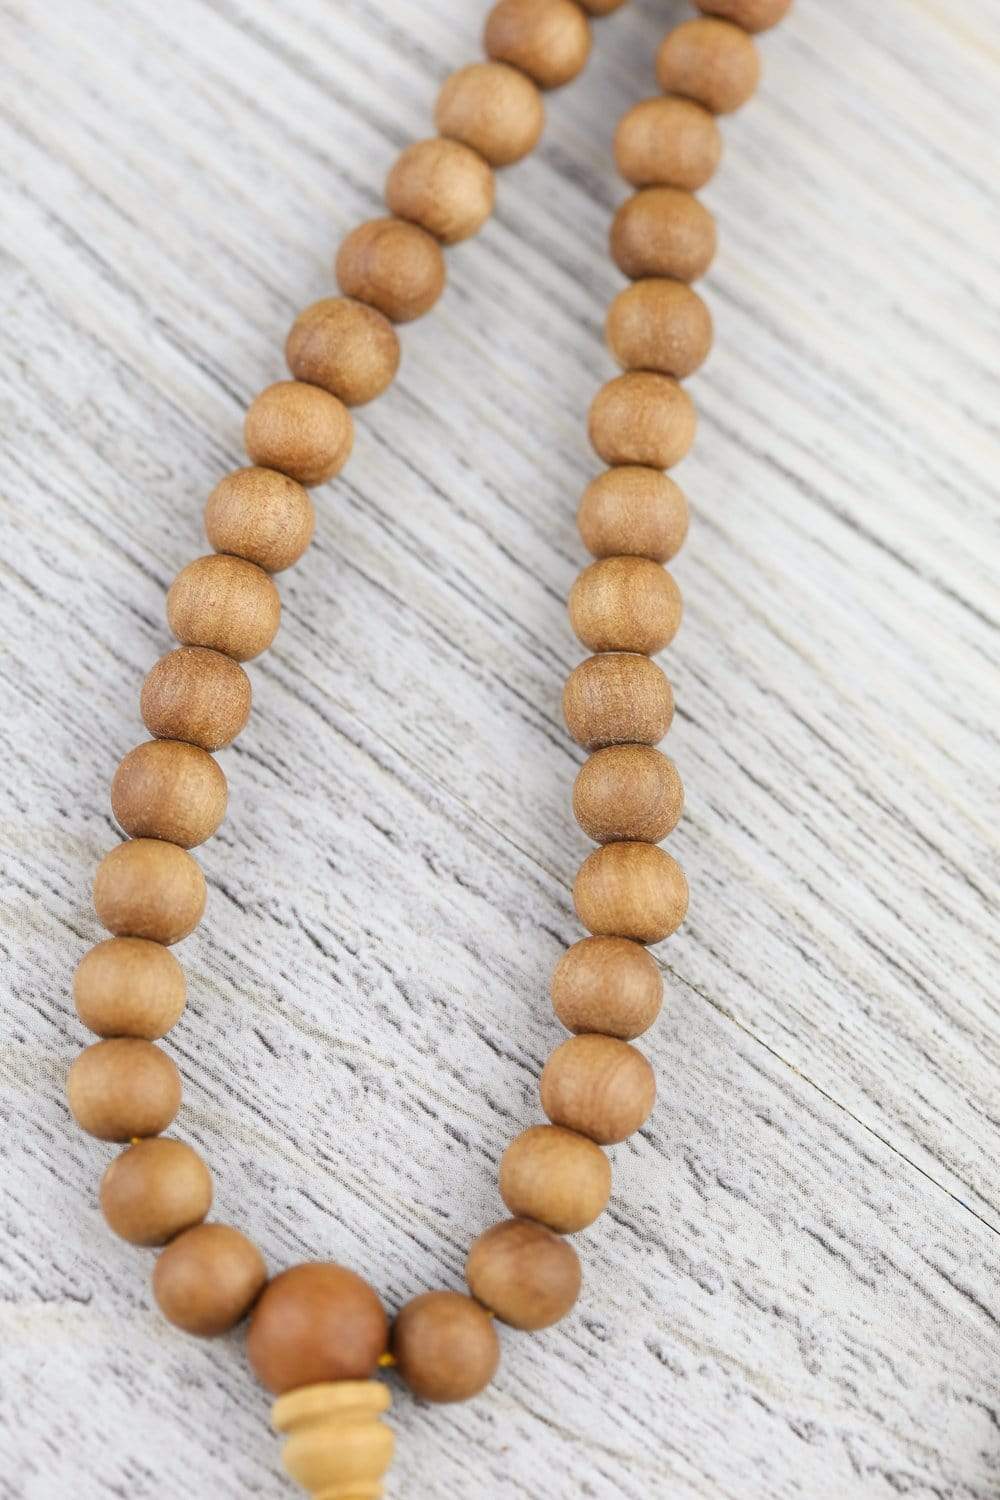 Mala Beads for Meditation - How to Choose, Use, and Cleanse the